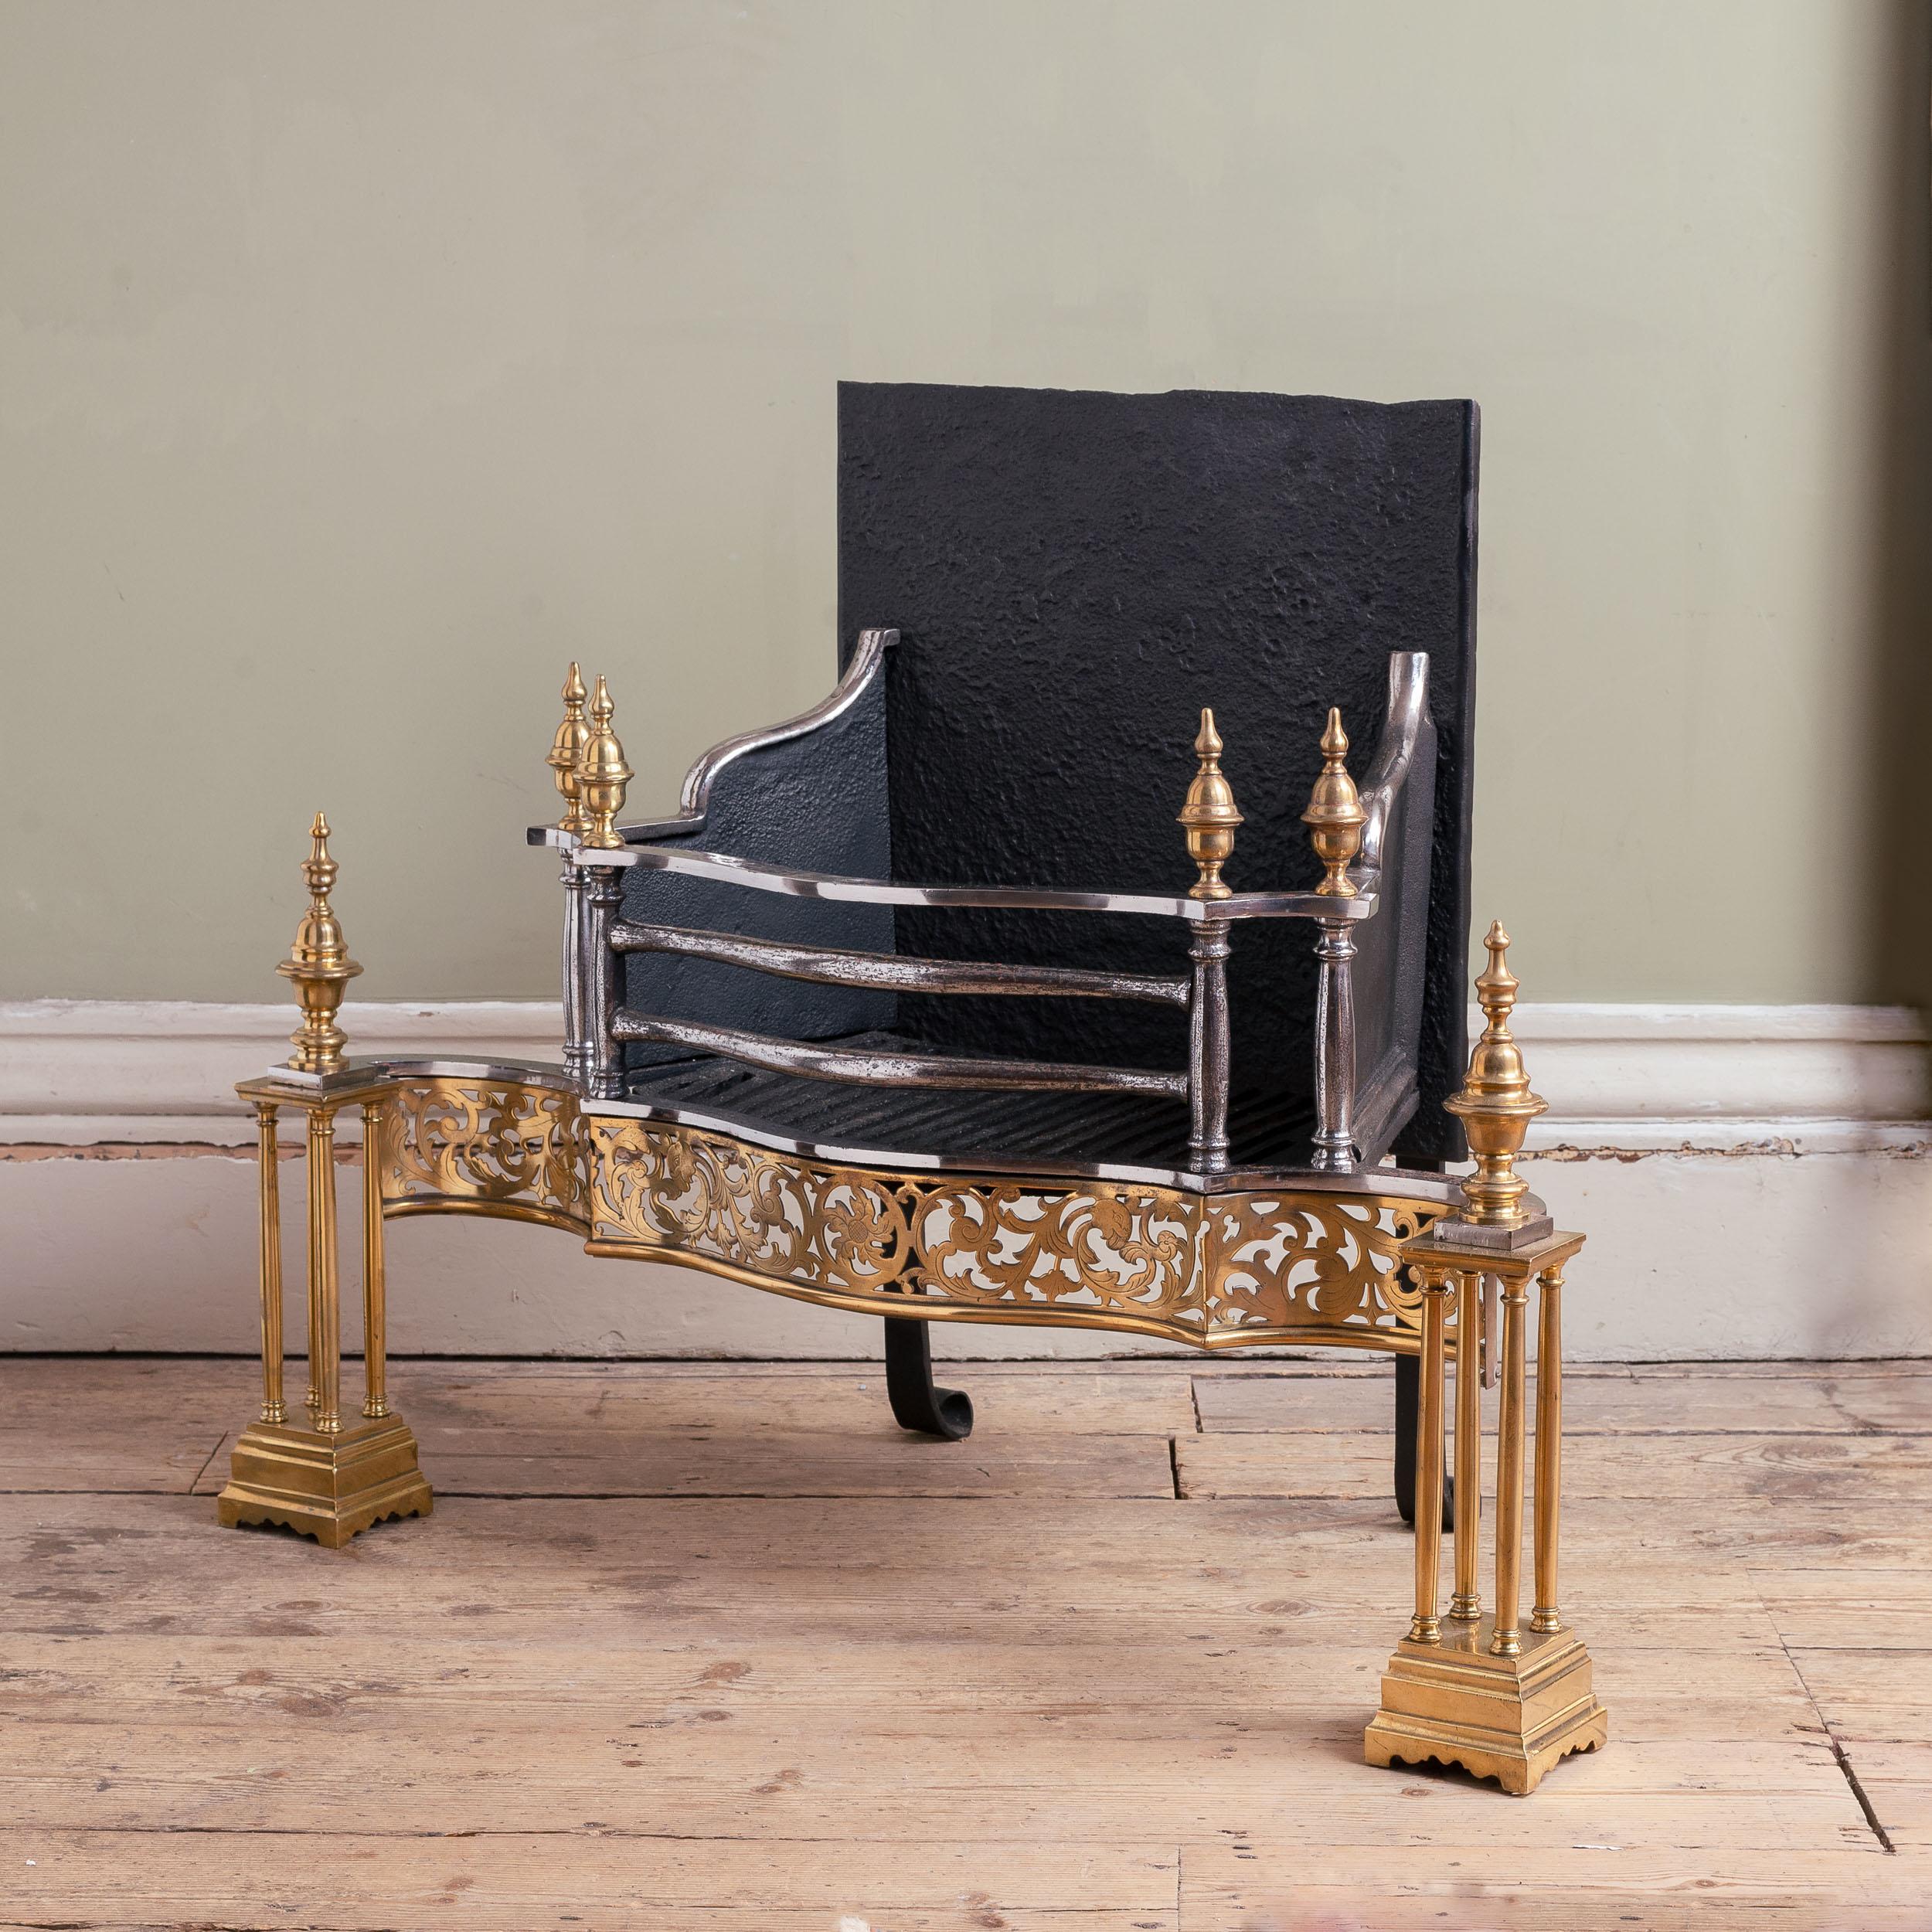 A Fine nineteenth century brass and iron firegrate, mid-Victorian in the Georgian style, by Longden & Co of Sheffield, the serpentine railed basket flanked by double column supports, each with urn finial, the elegant engraved and fret-cut serpentine